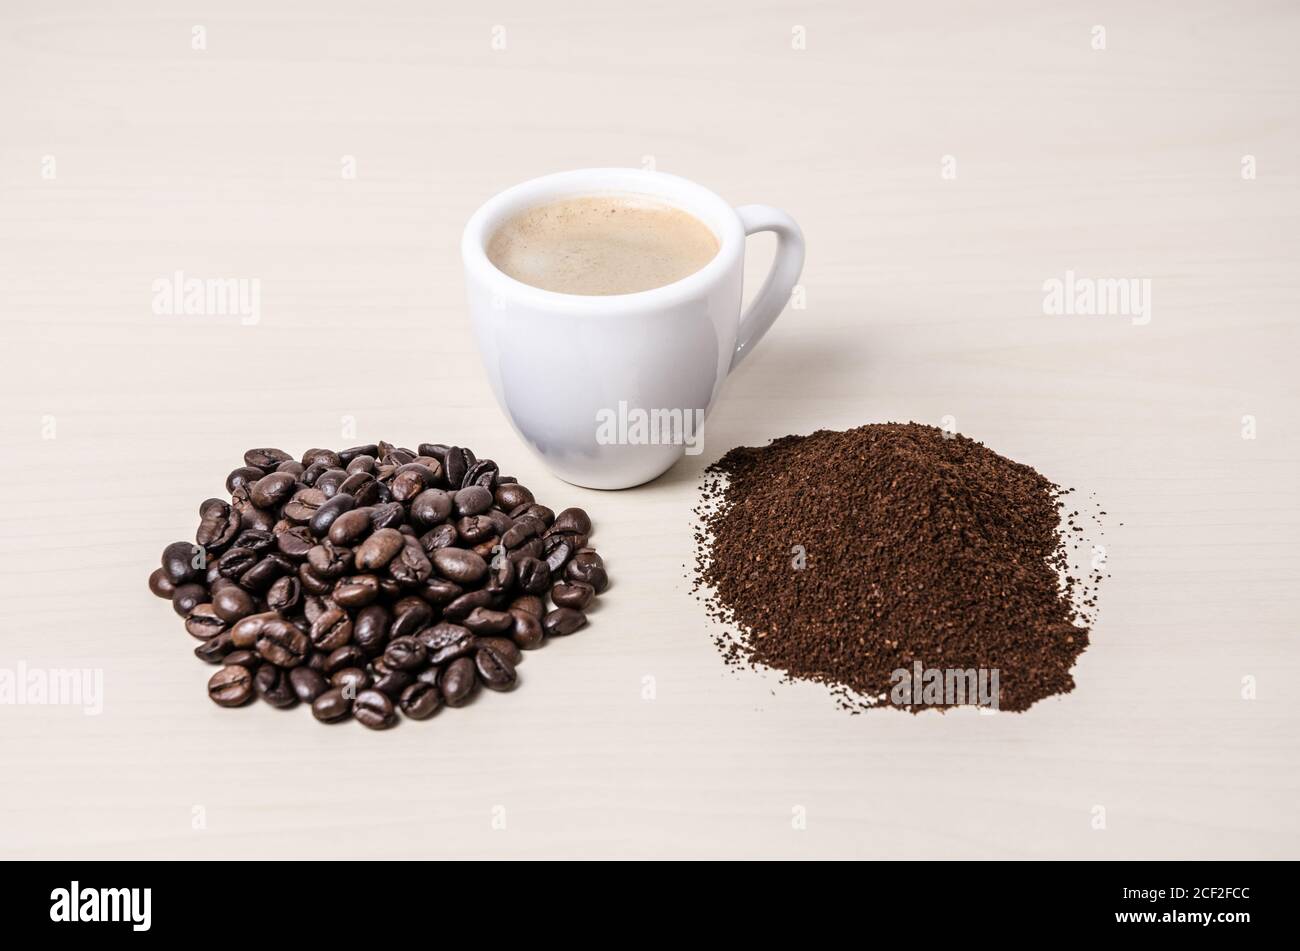 One coffee cup or mug with beans and ground coffee on wooden desk or table, I like, love coffee, close-up, coffee making concept Stock Photo